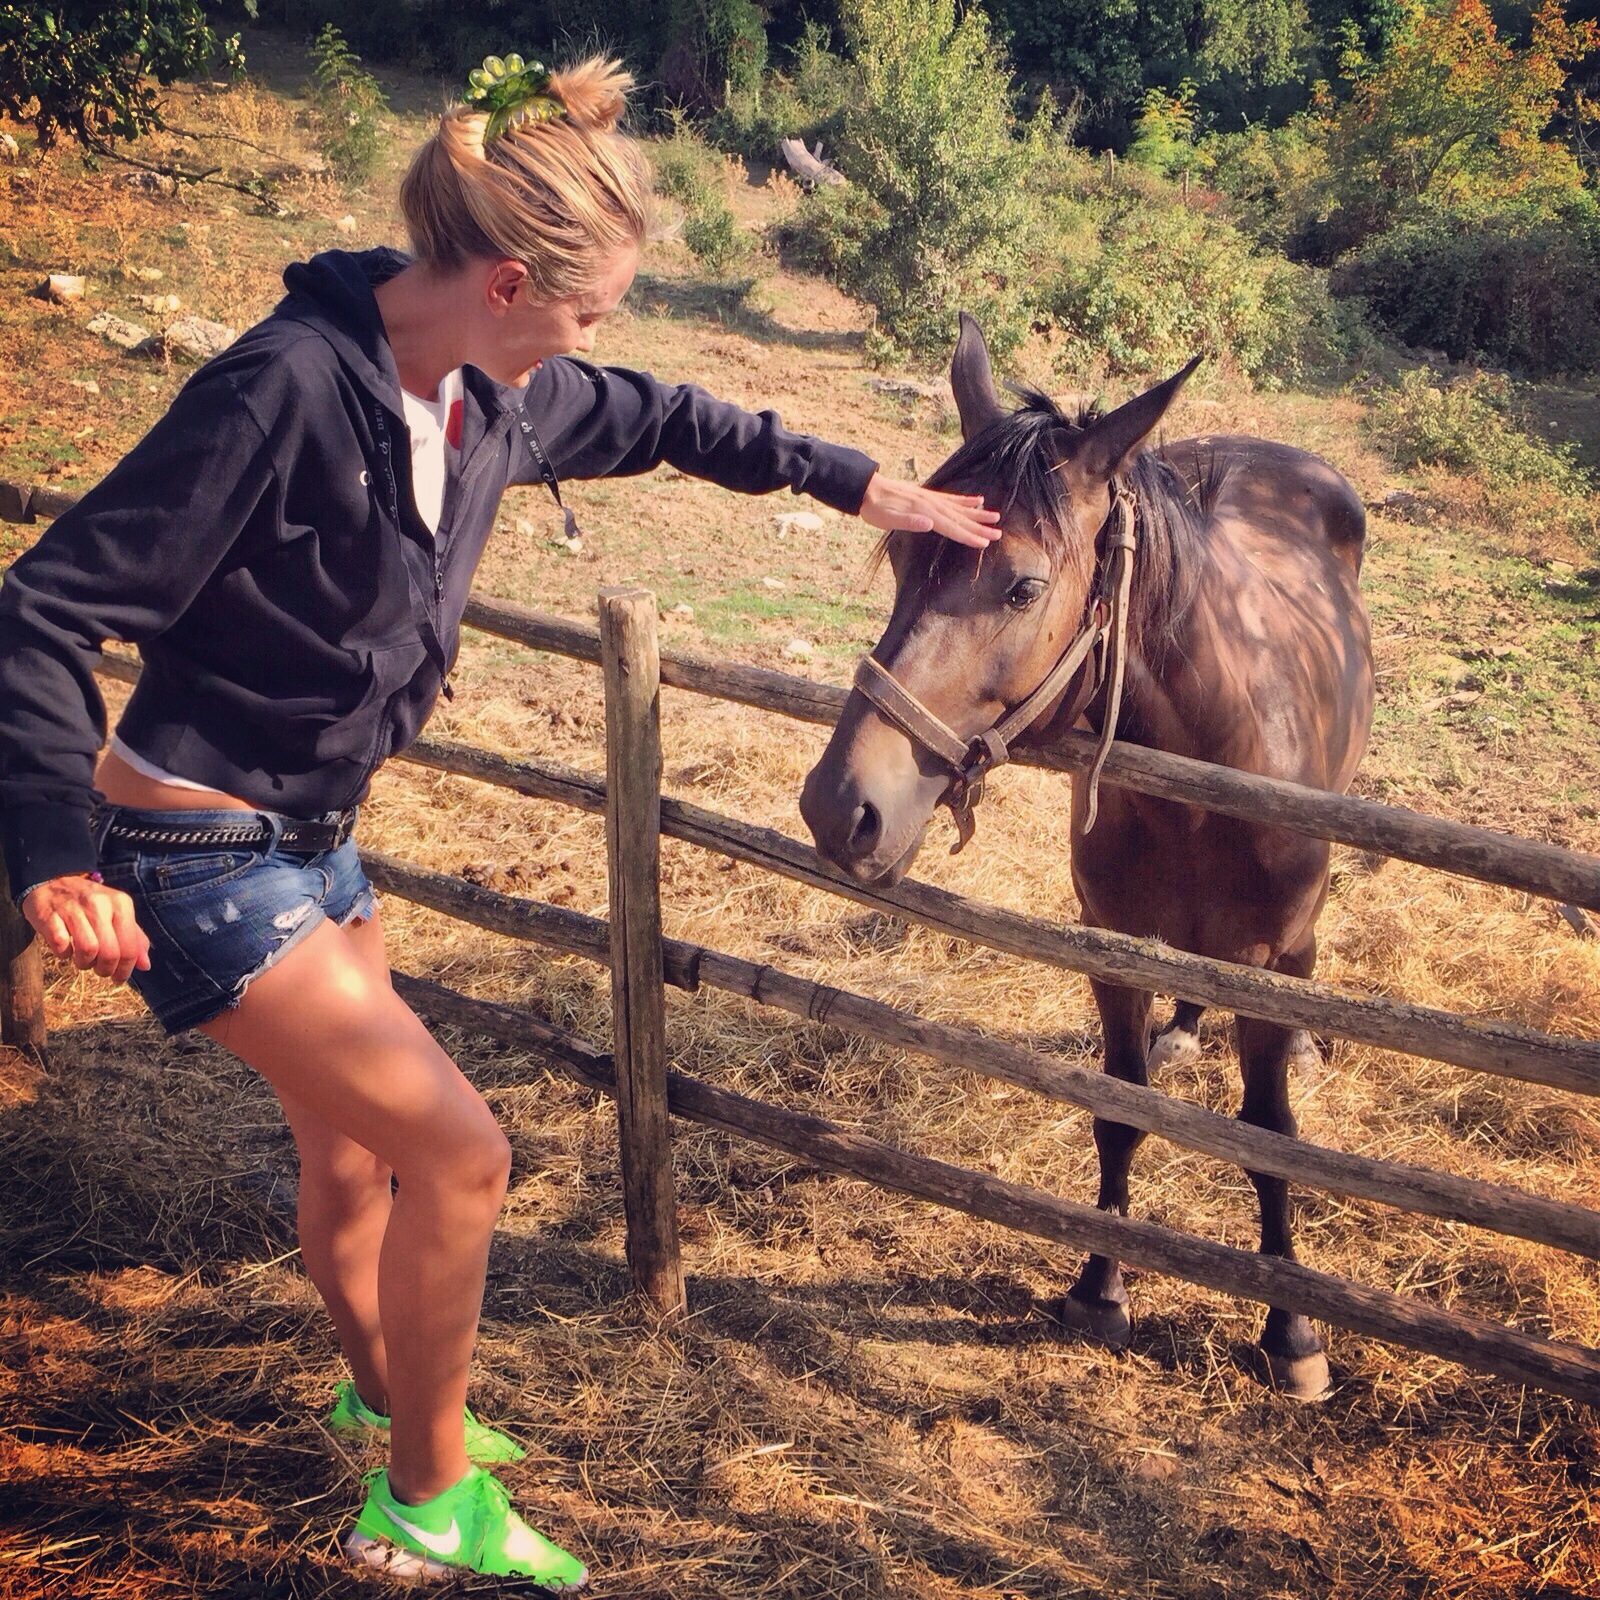 I met a new friend in Tuscany.